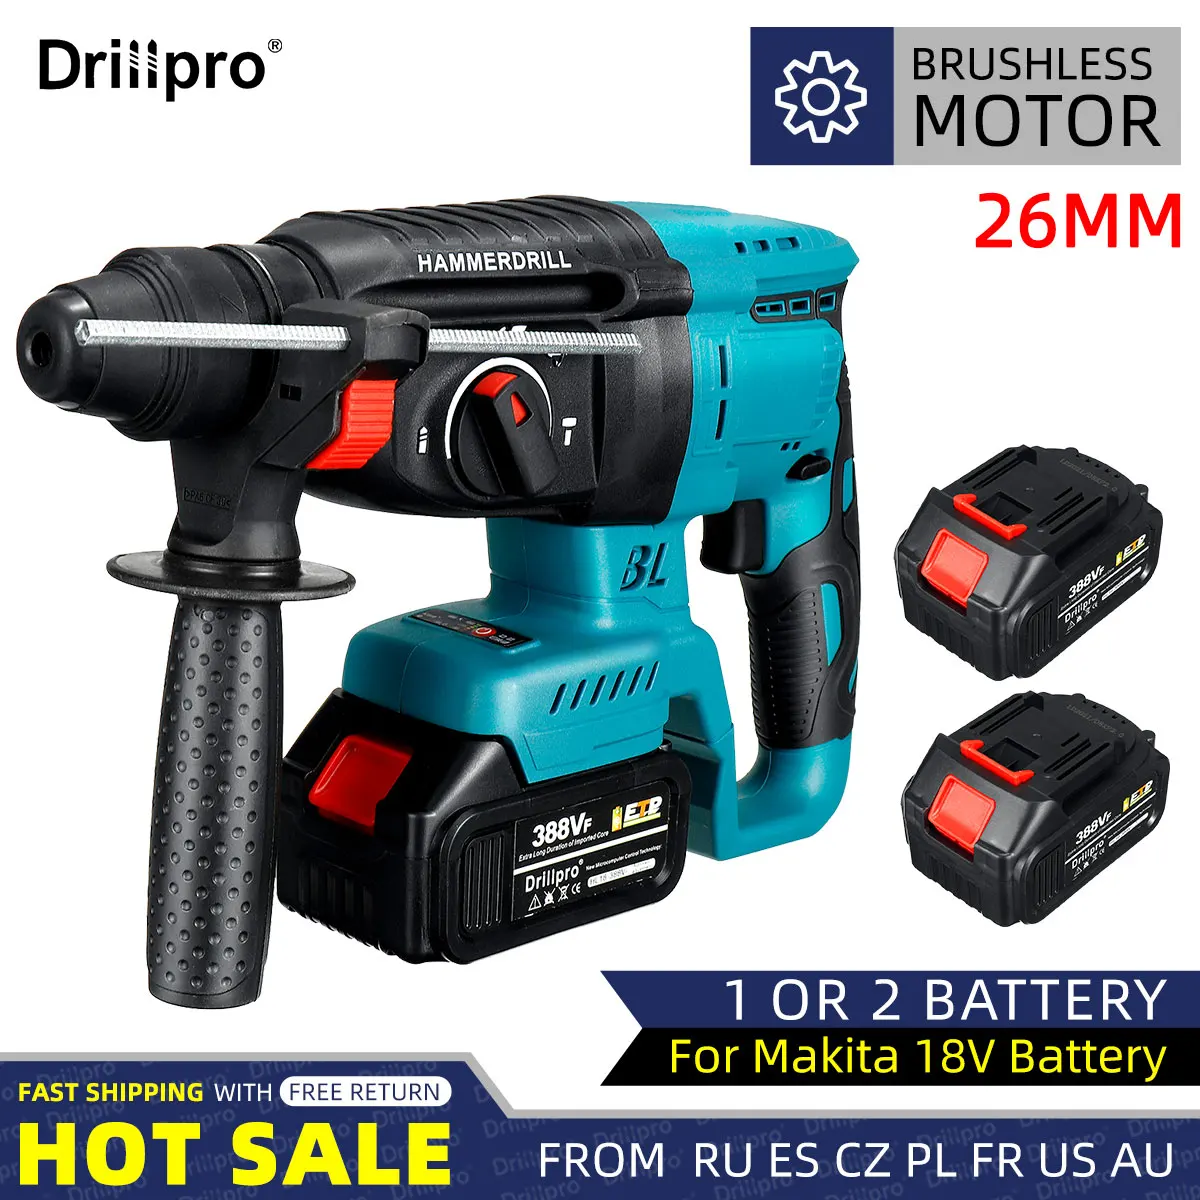 Drillpro 338VF Brushless Rechargeable Rotary Hammer Drill with 2 Batteries Electric Hammer Impact Drill for Makita 18V Battery